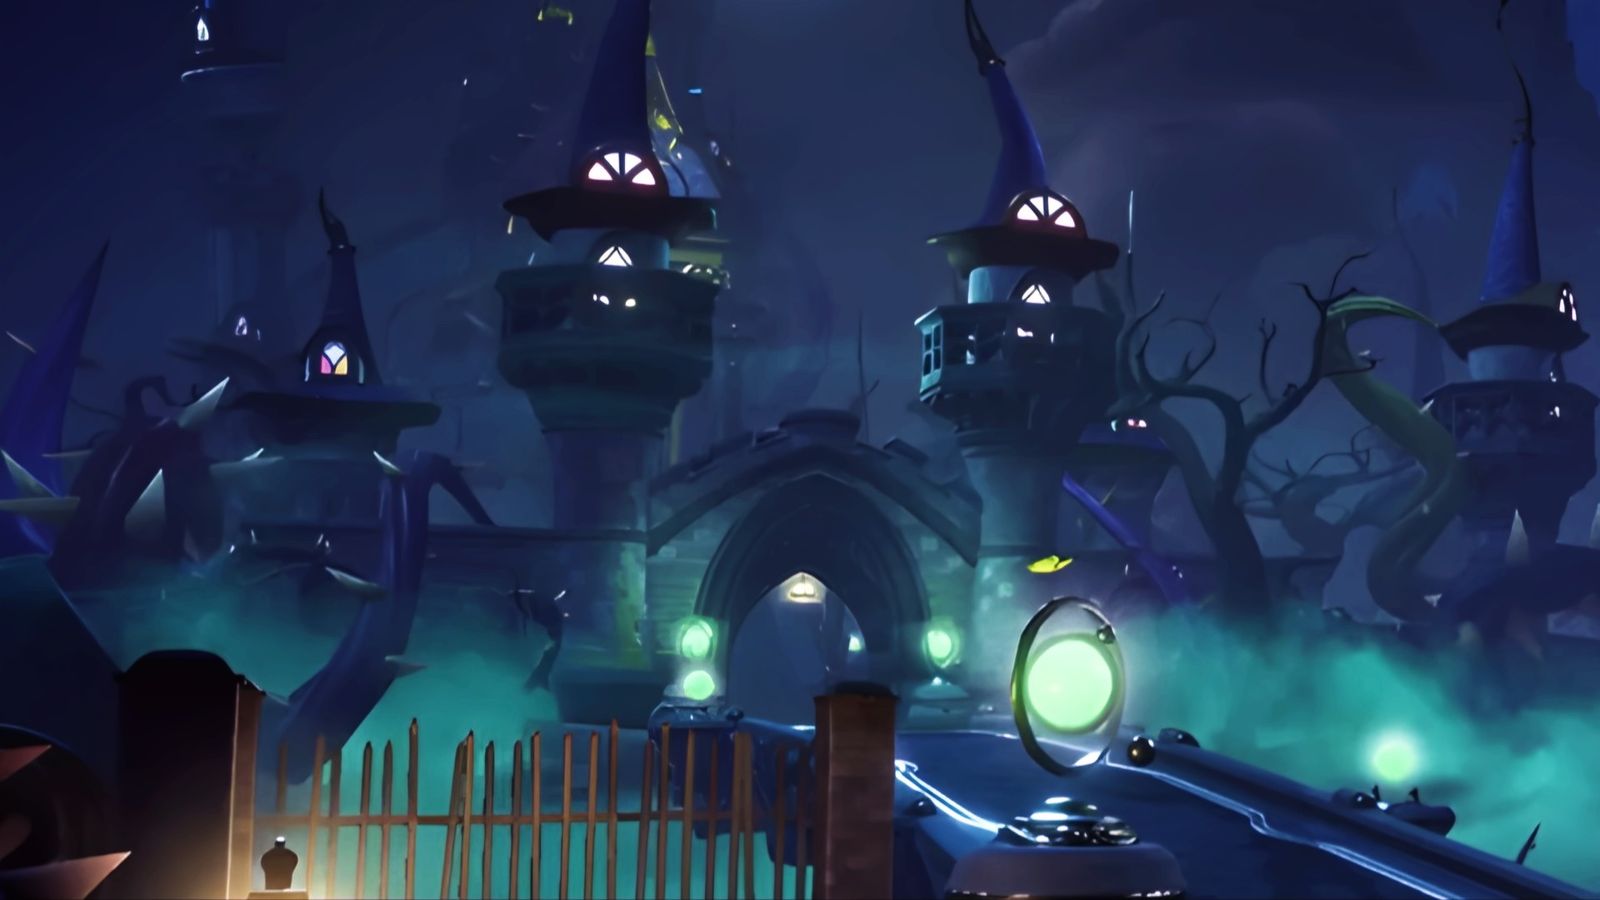 Disney Dreamlight Valley Dark Castle - a spooky castle with a bridge, surrounded by ghostly fog.